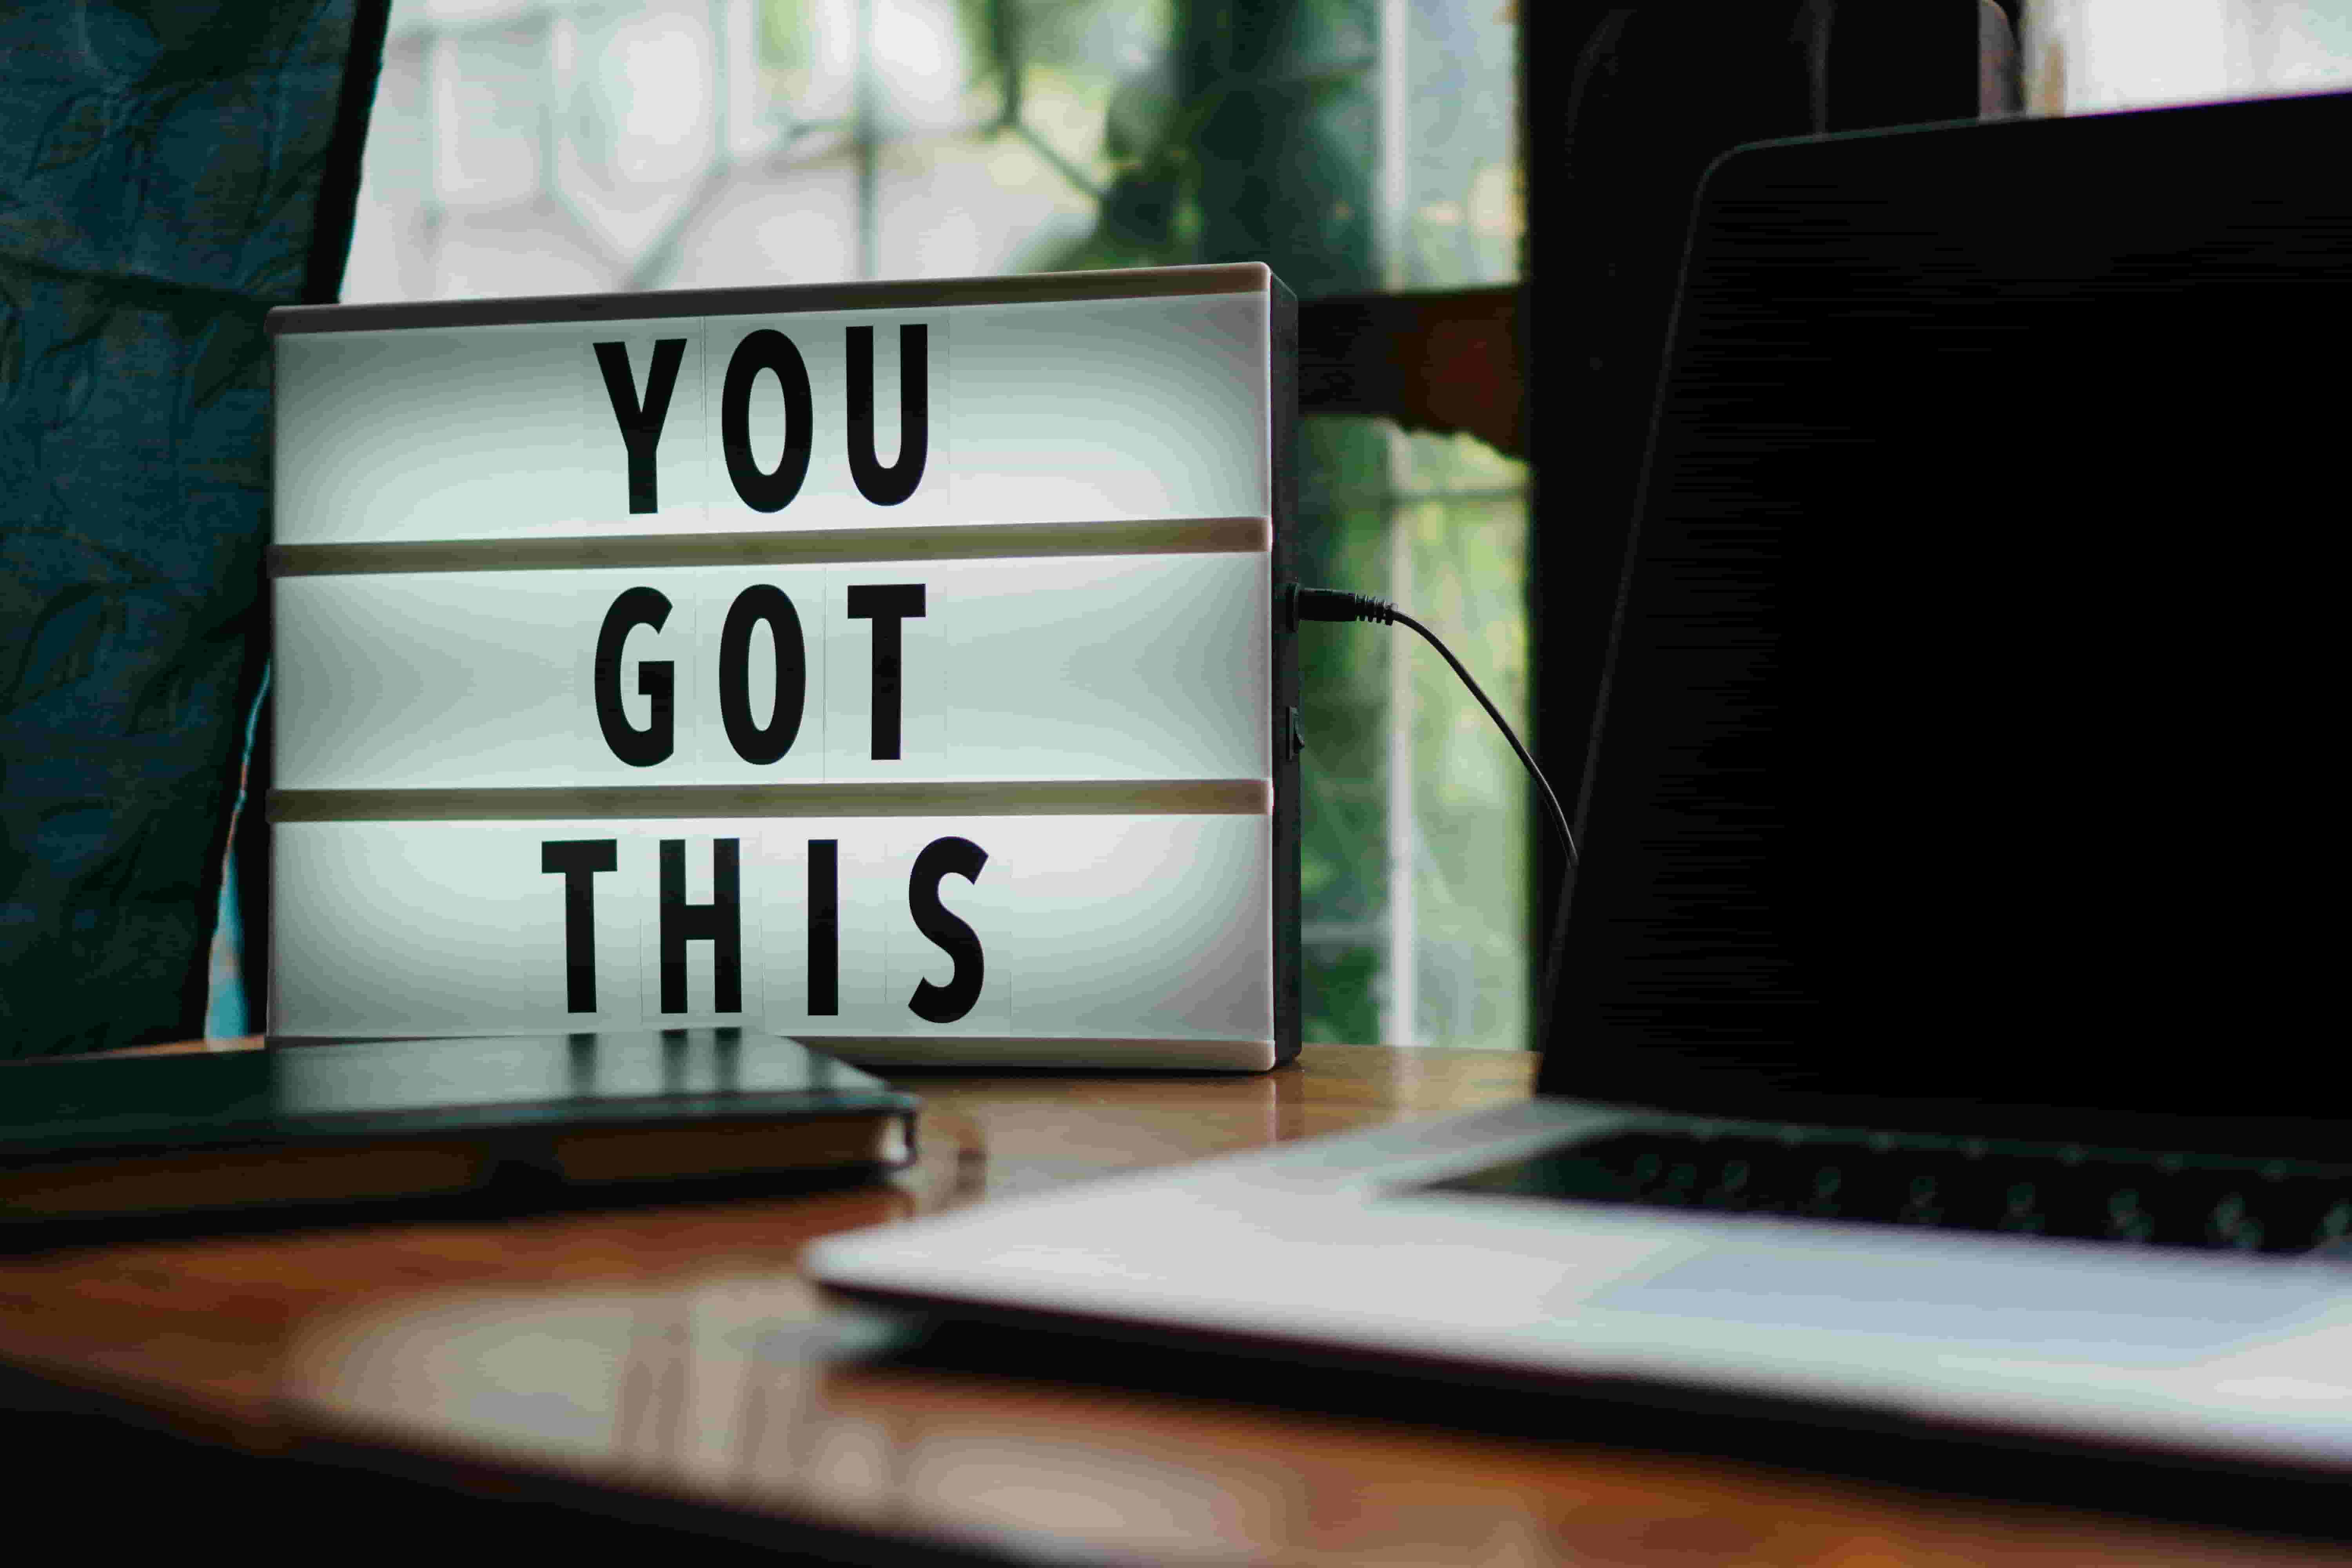 The words 'You Got This' are displayed on a light box next to a laptop